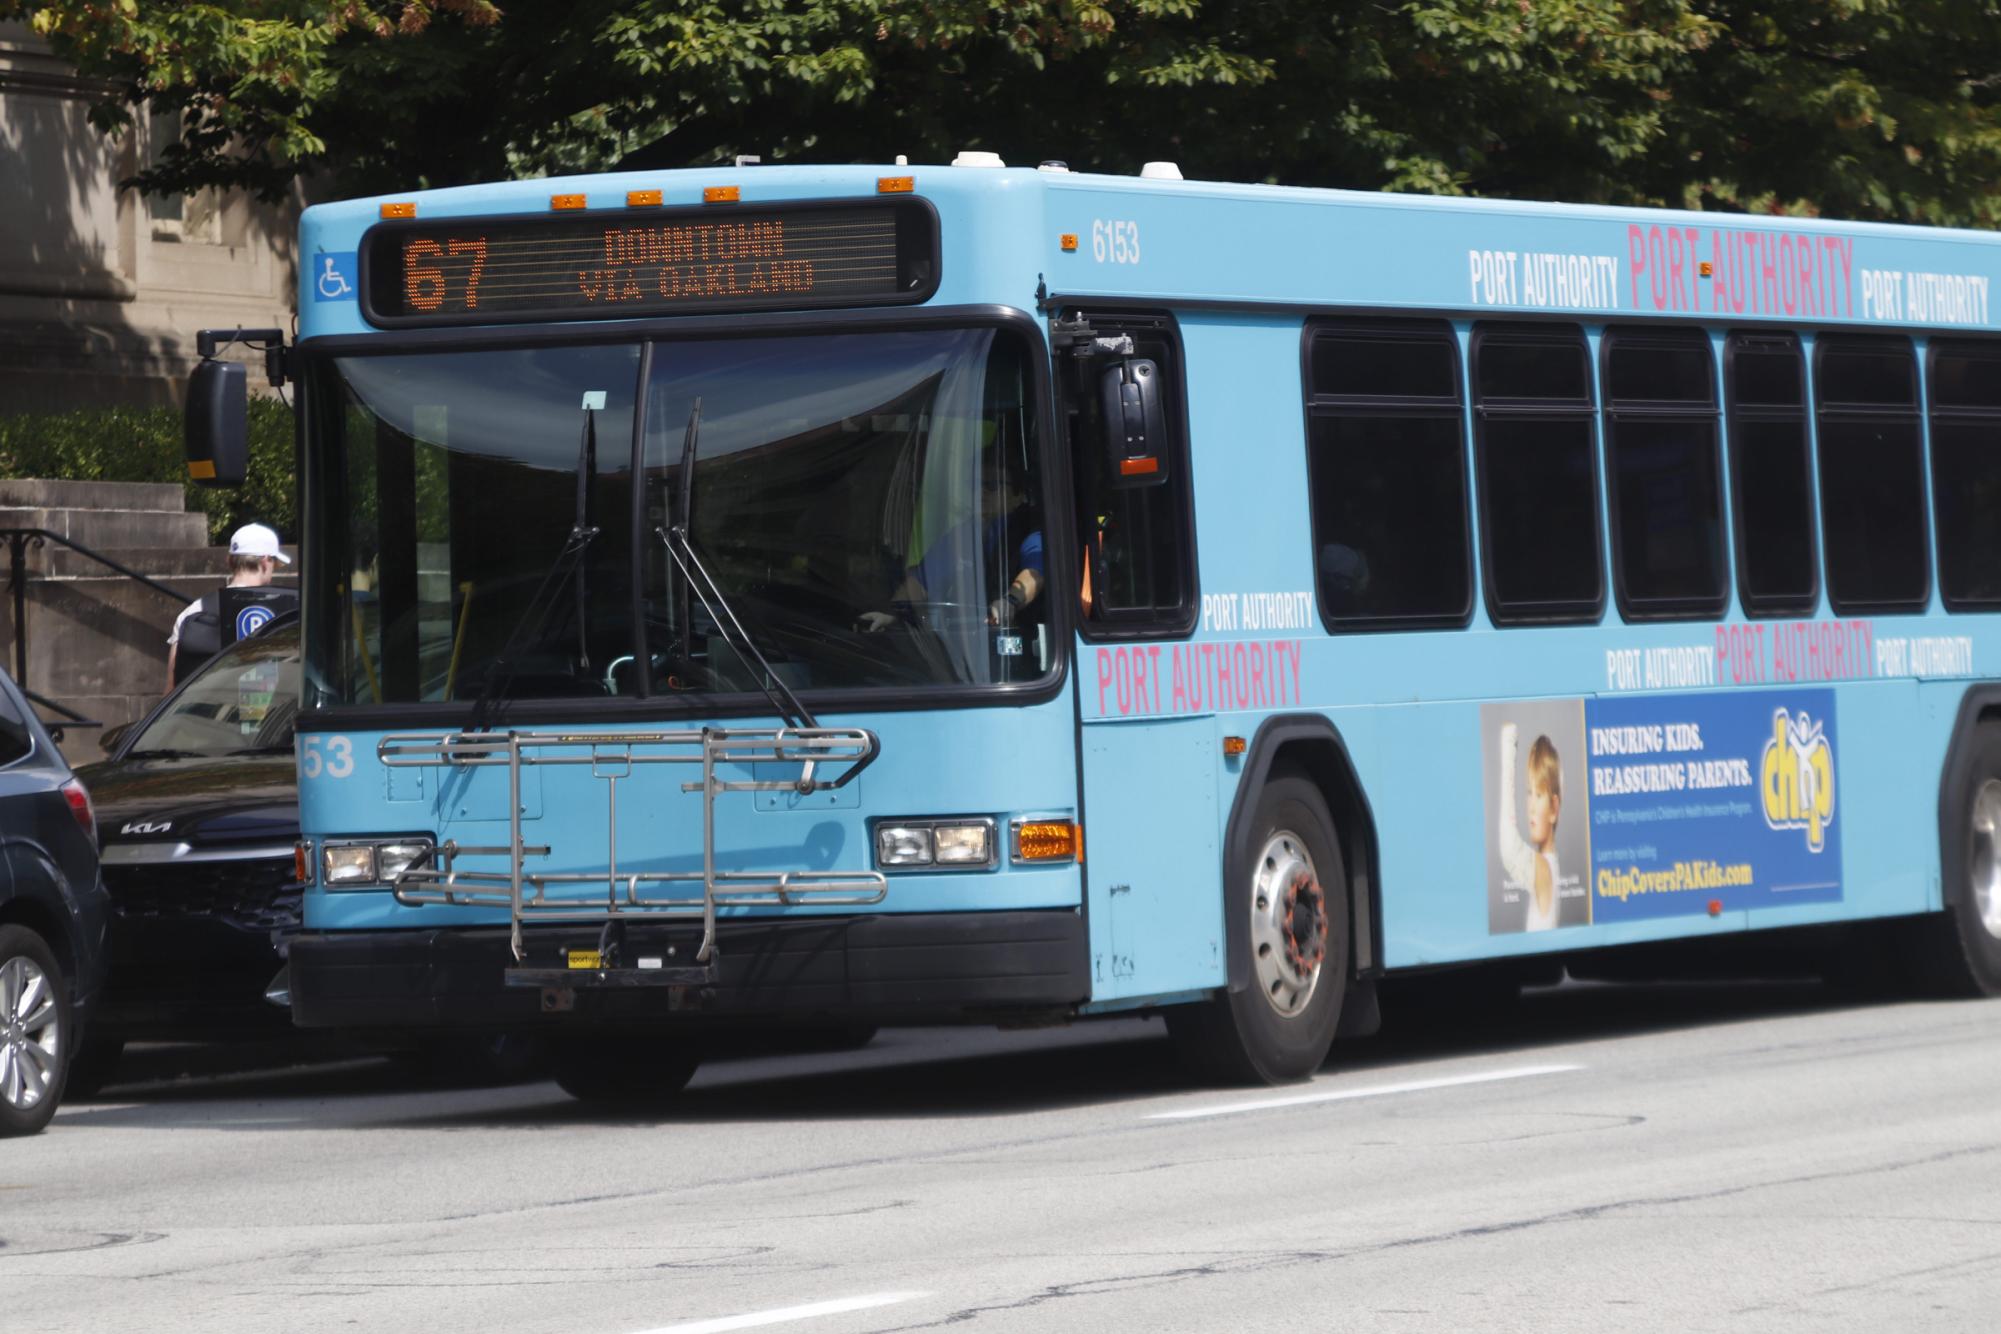 Port Authority rebrands to Pittsburgh Regional Transit